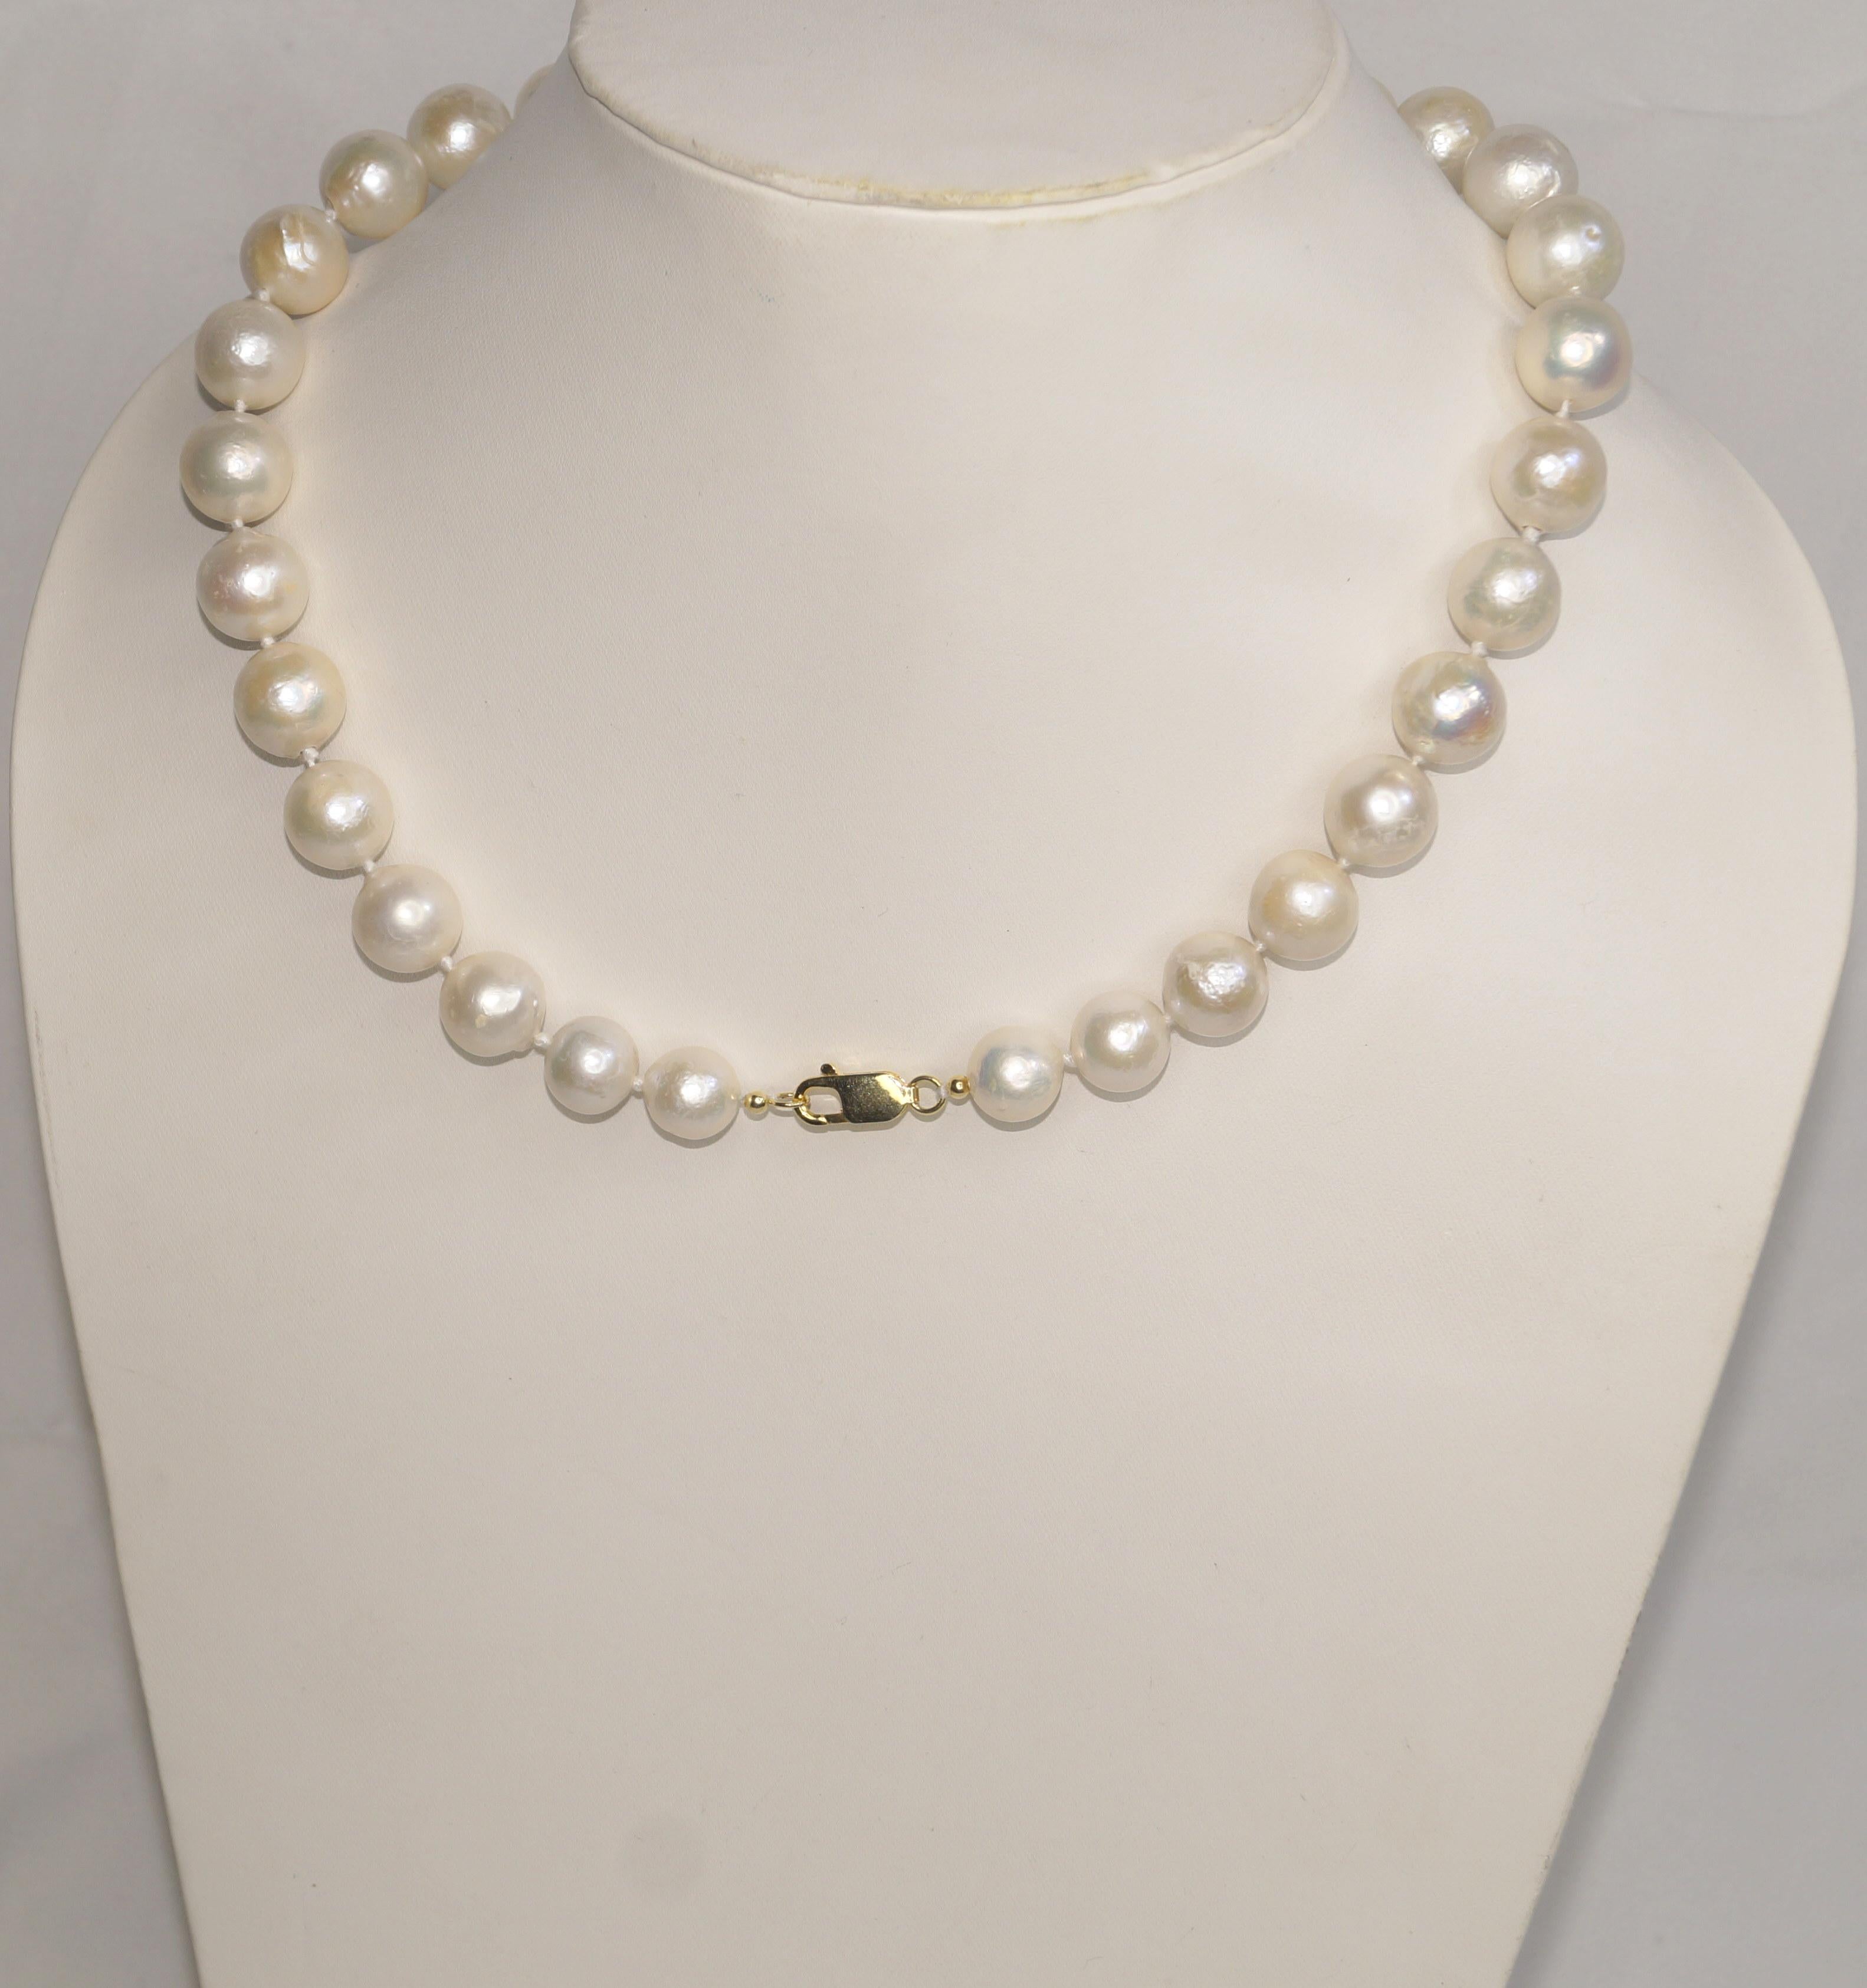 15mm pearl necklace